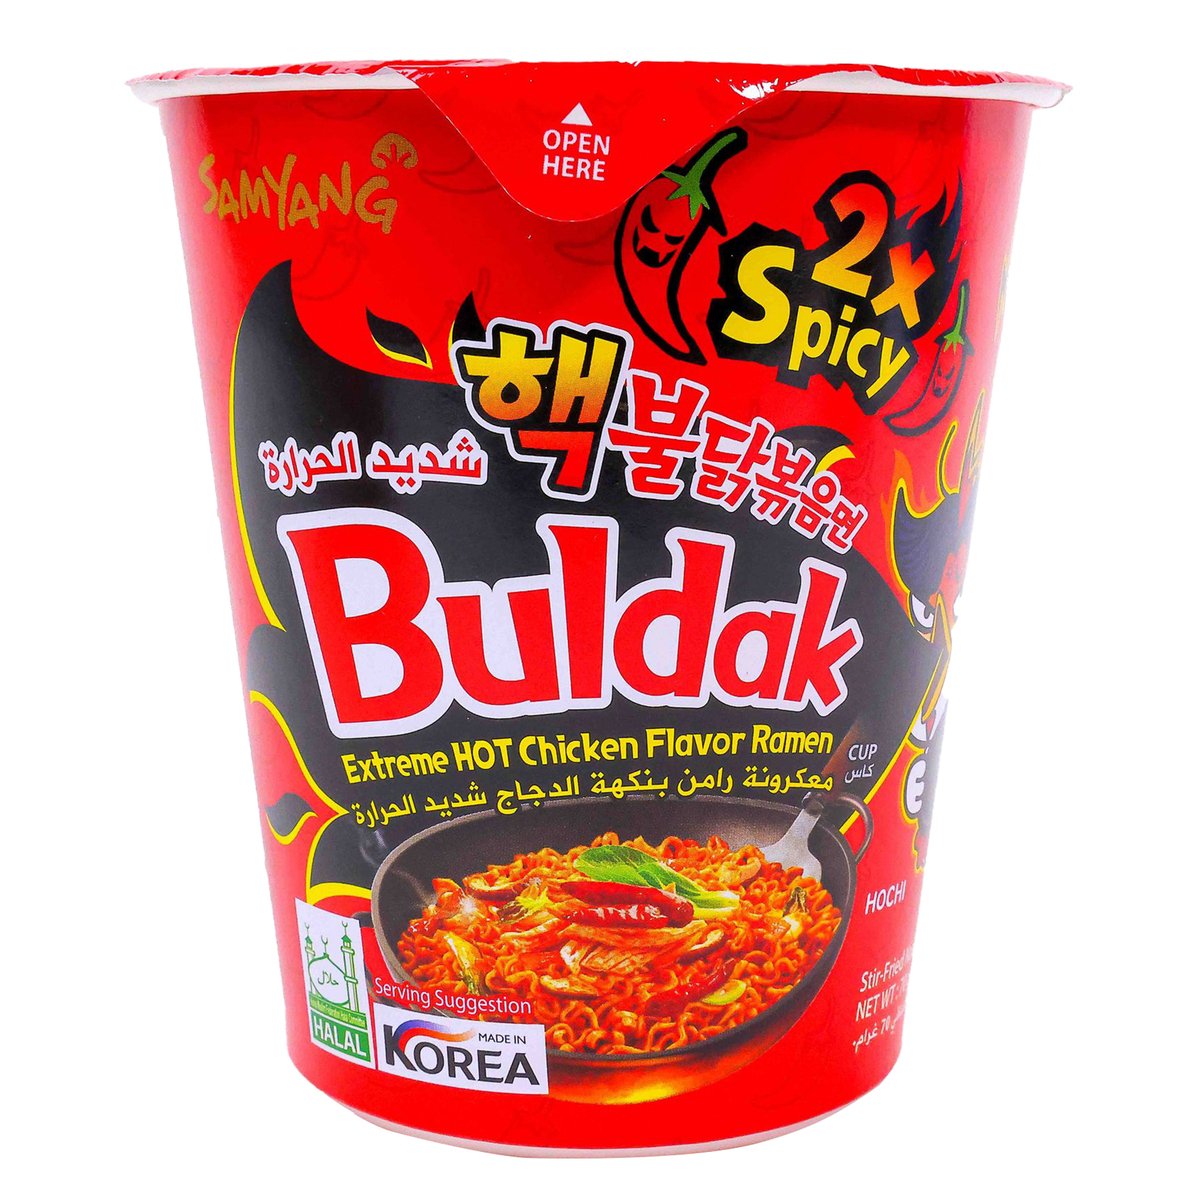 Samyang 2x Spicy Extreme Hot Chicken Ramen Cup Noodles With Added Sugar 70 g